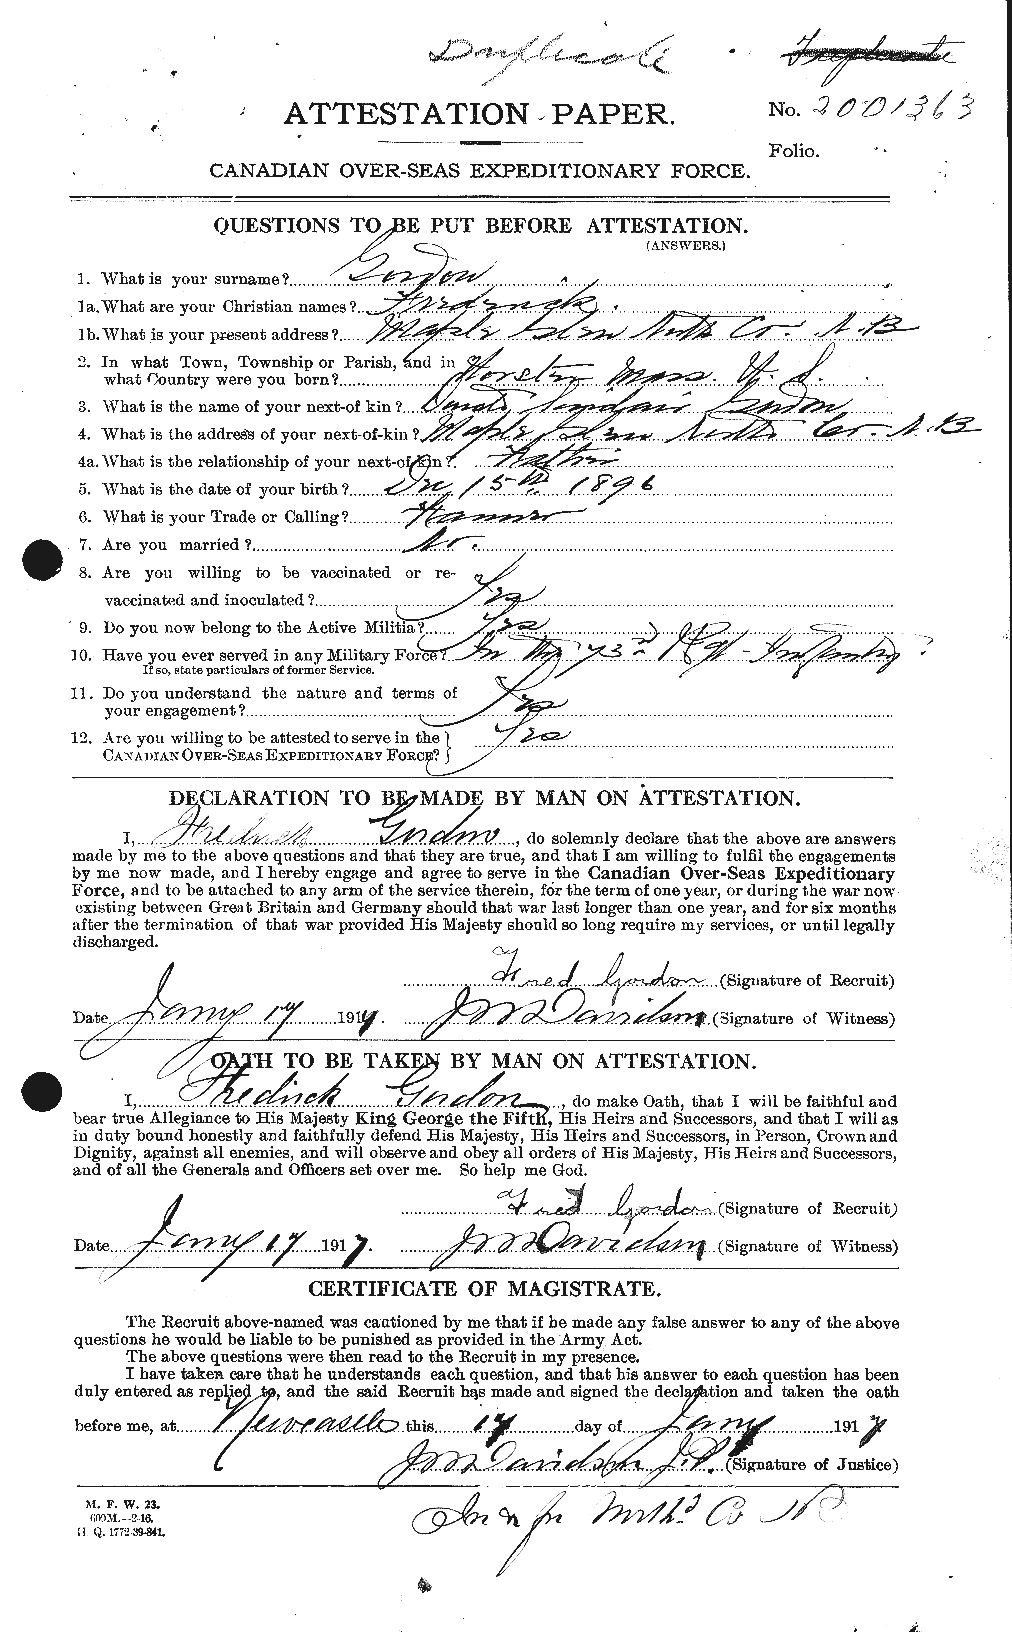 Personnel Records of the First World War - CEF 358381a